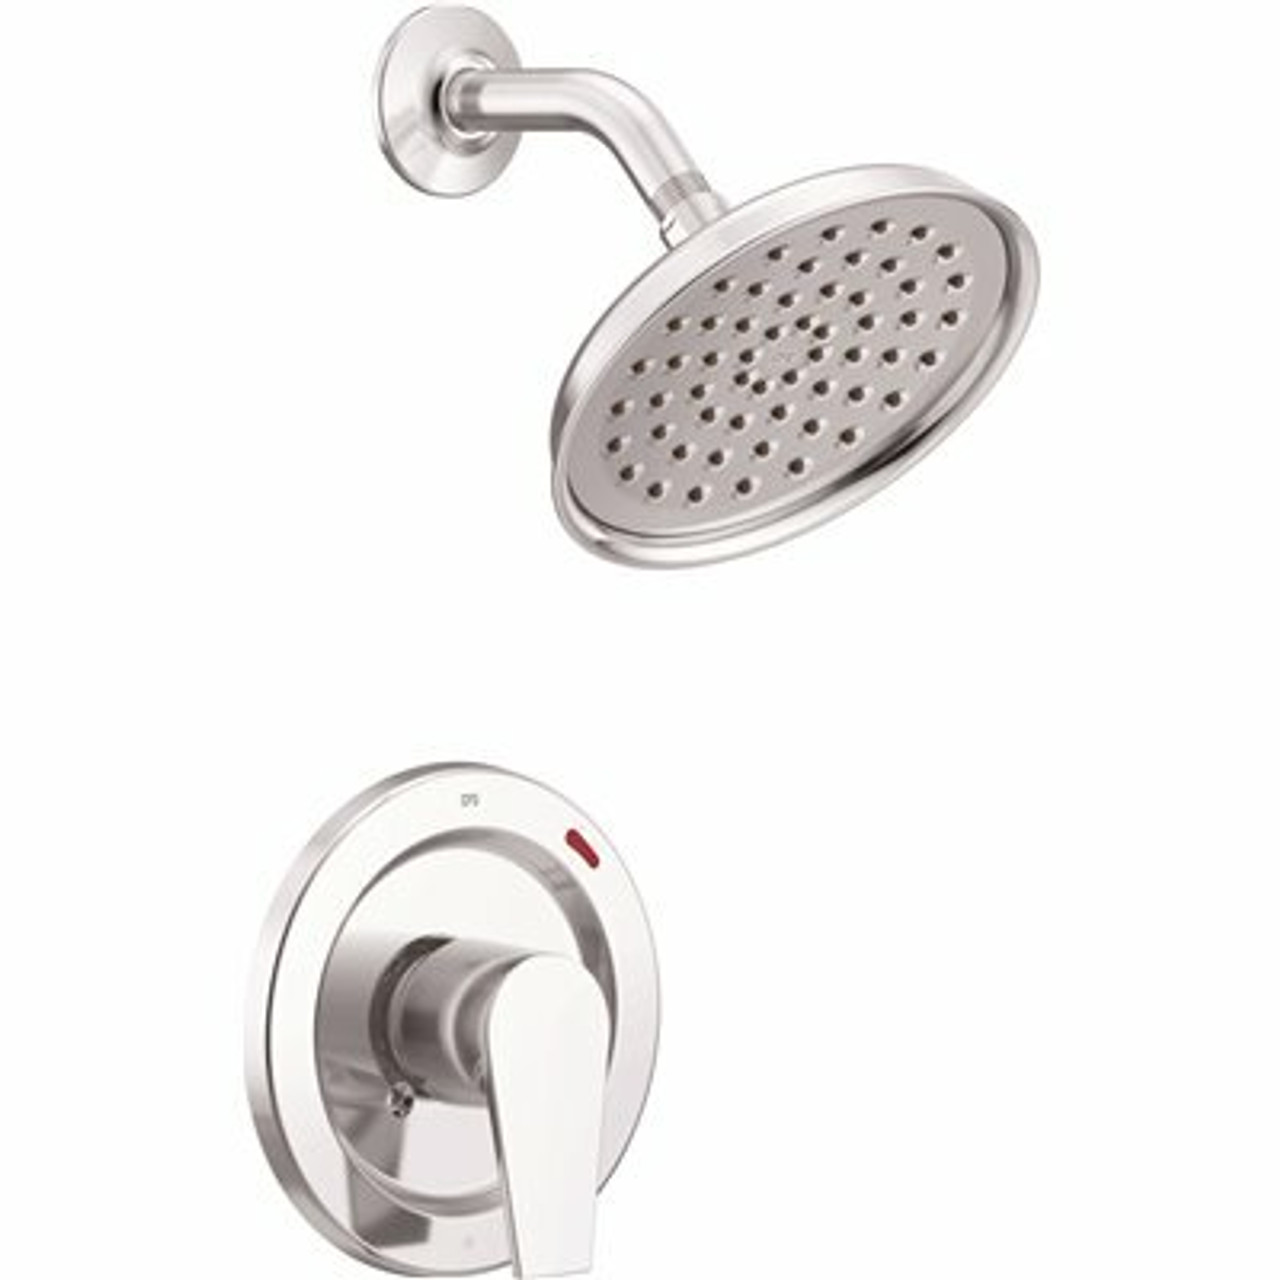 Cleveland Faucet Group Slate 1-Handle Eco-Performance Shower Faucet Trim Kit In Chrome (Valve Included)